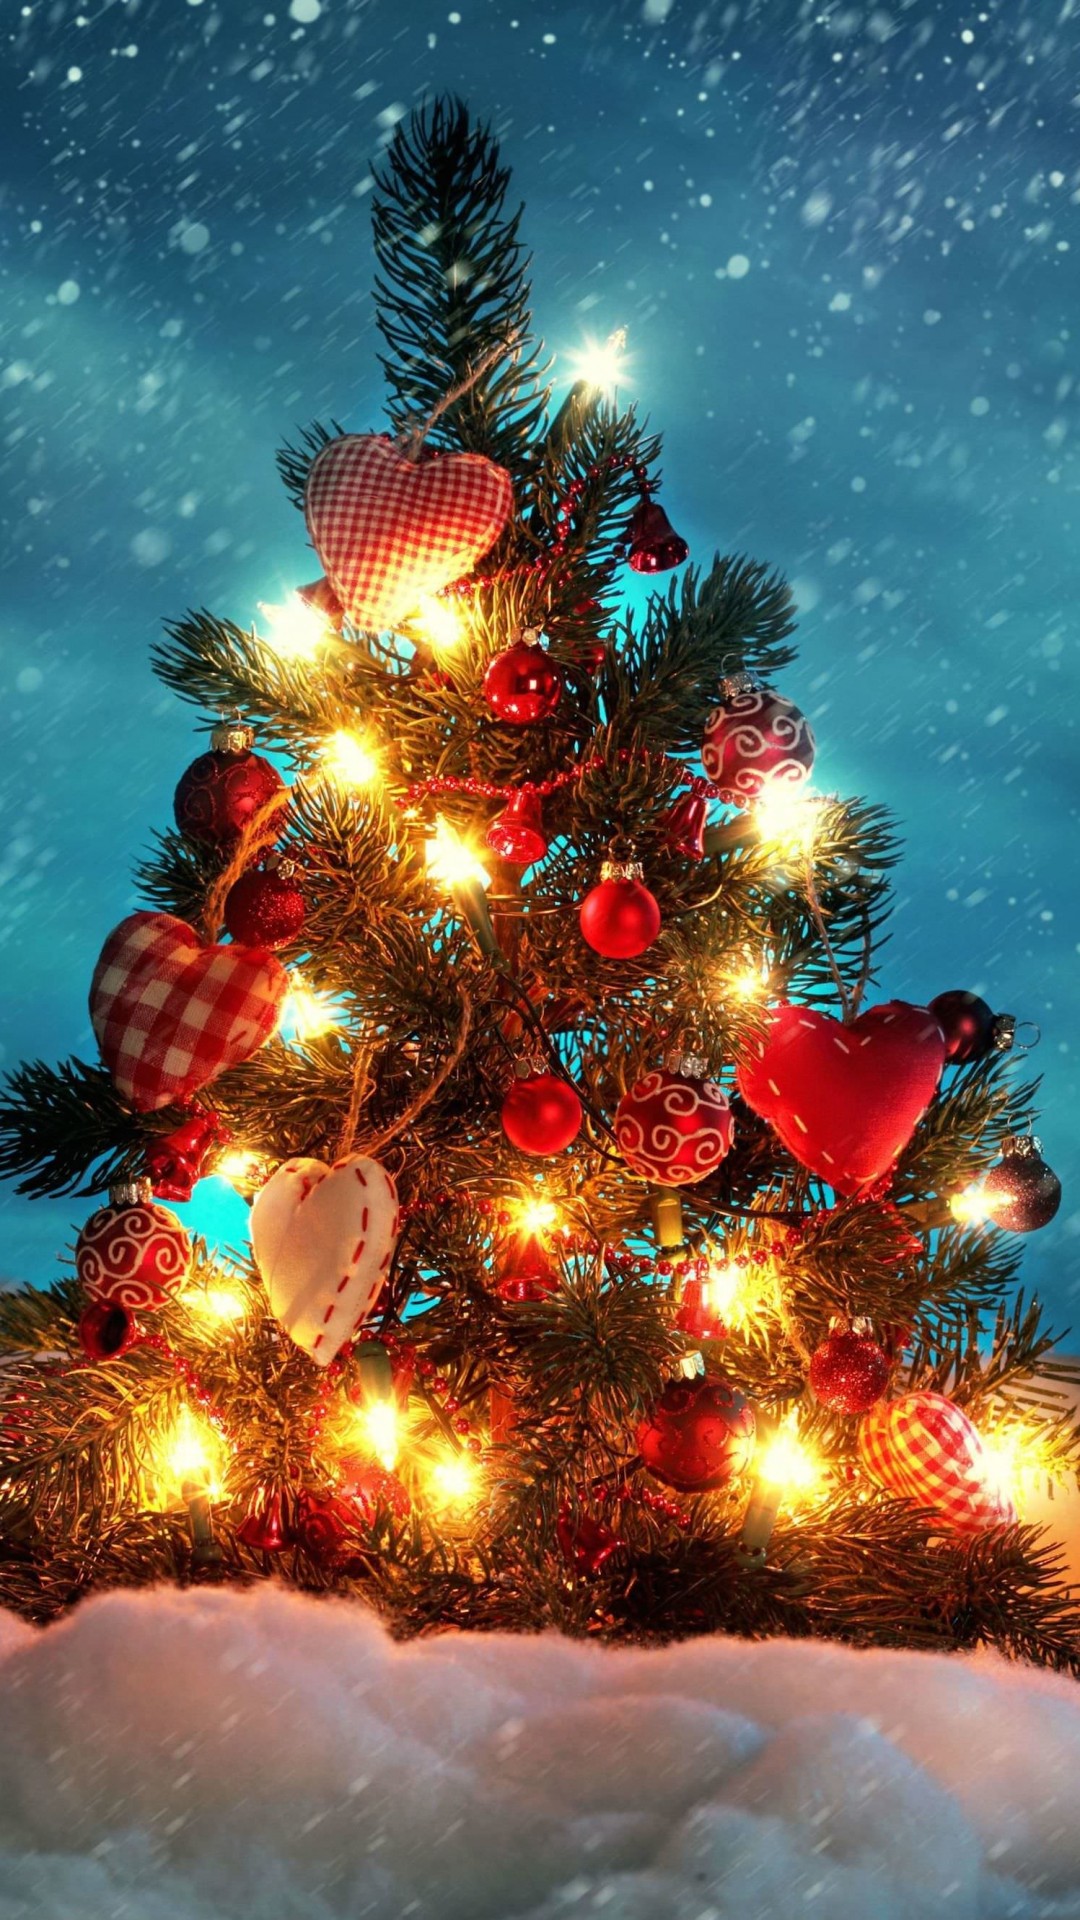 Christmas Tree Wallpaper for SAMSUNG Galaxy Note 3